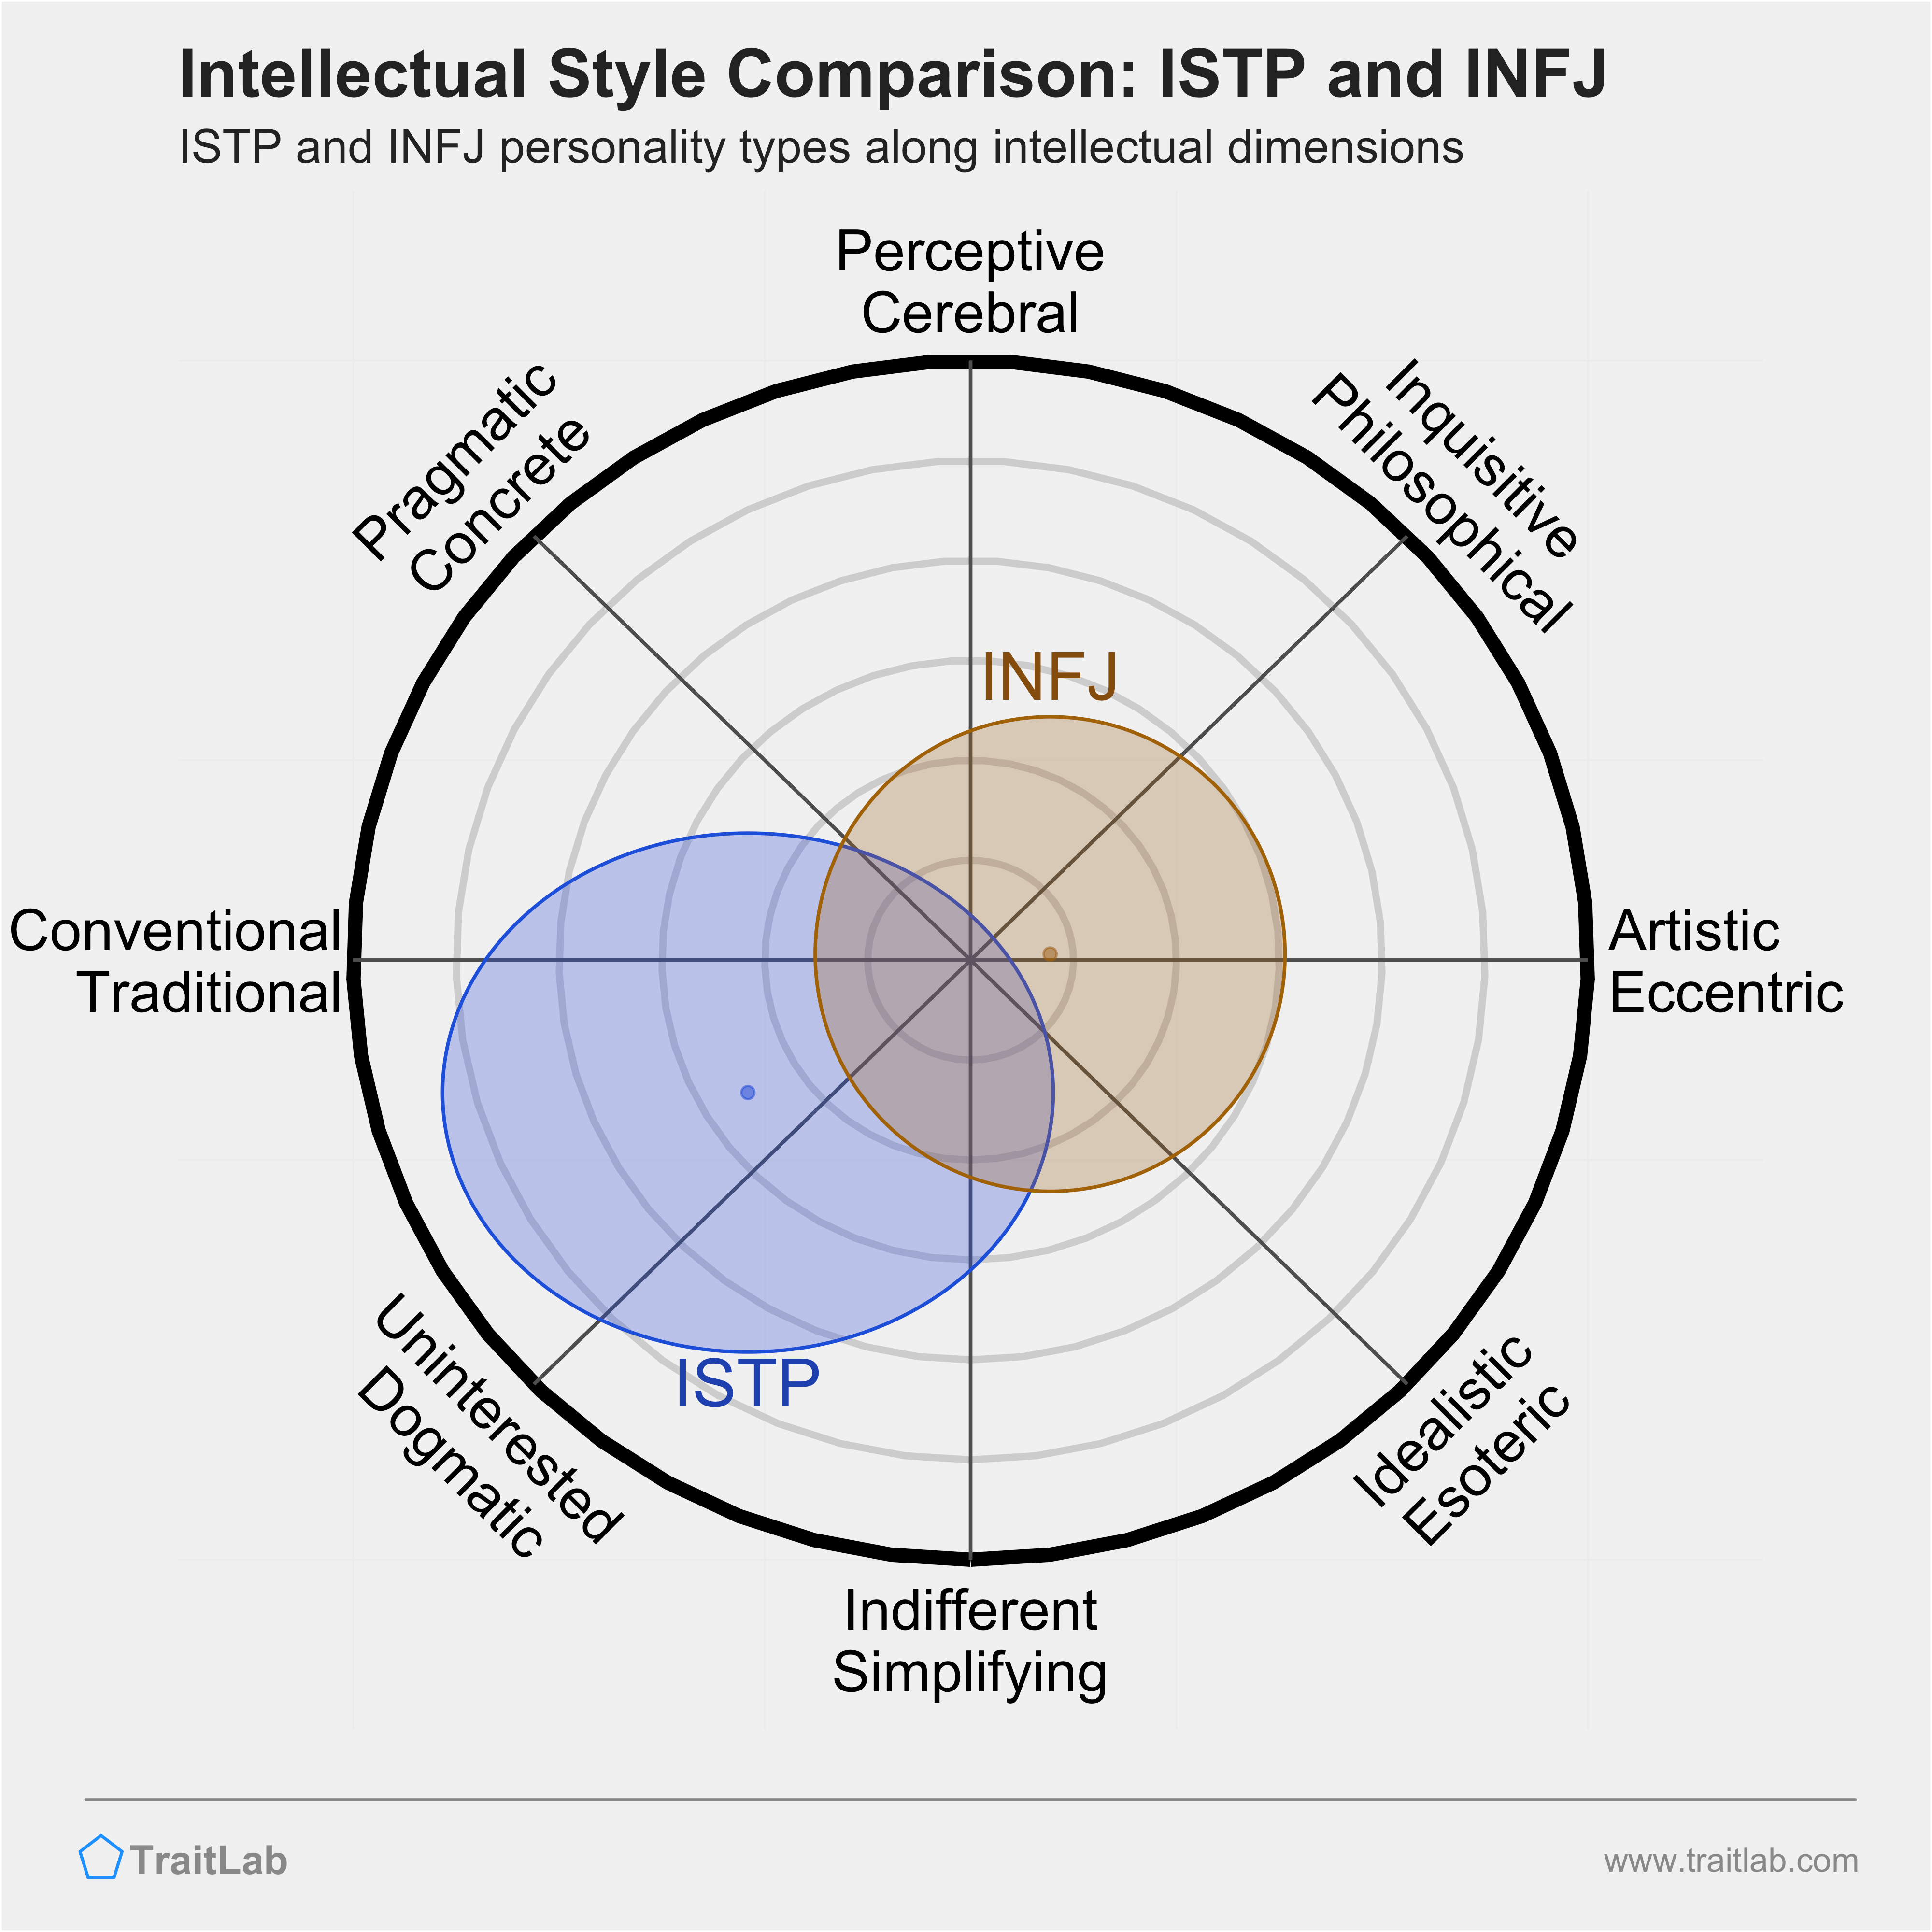 ISTP and INFJ comparison across intellectual dimensions